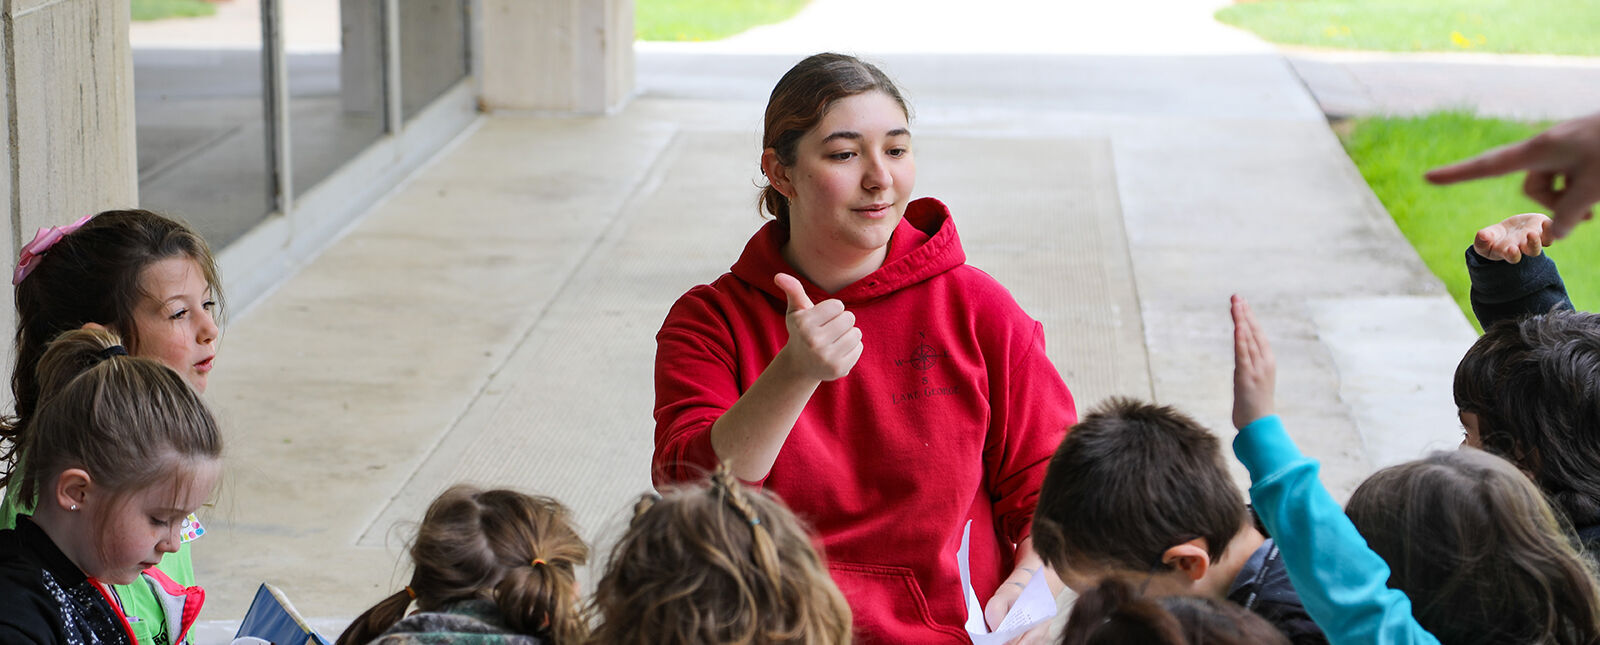 A teaching student works with children visiting the Elmira College campus